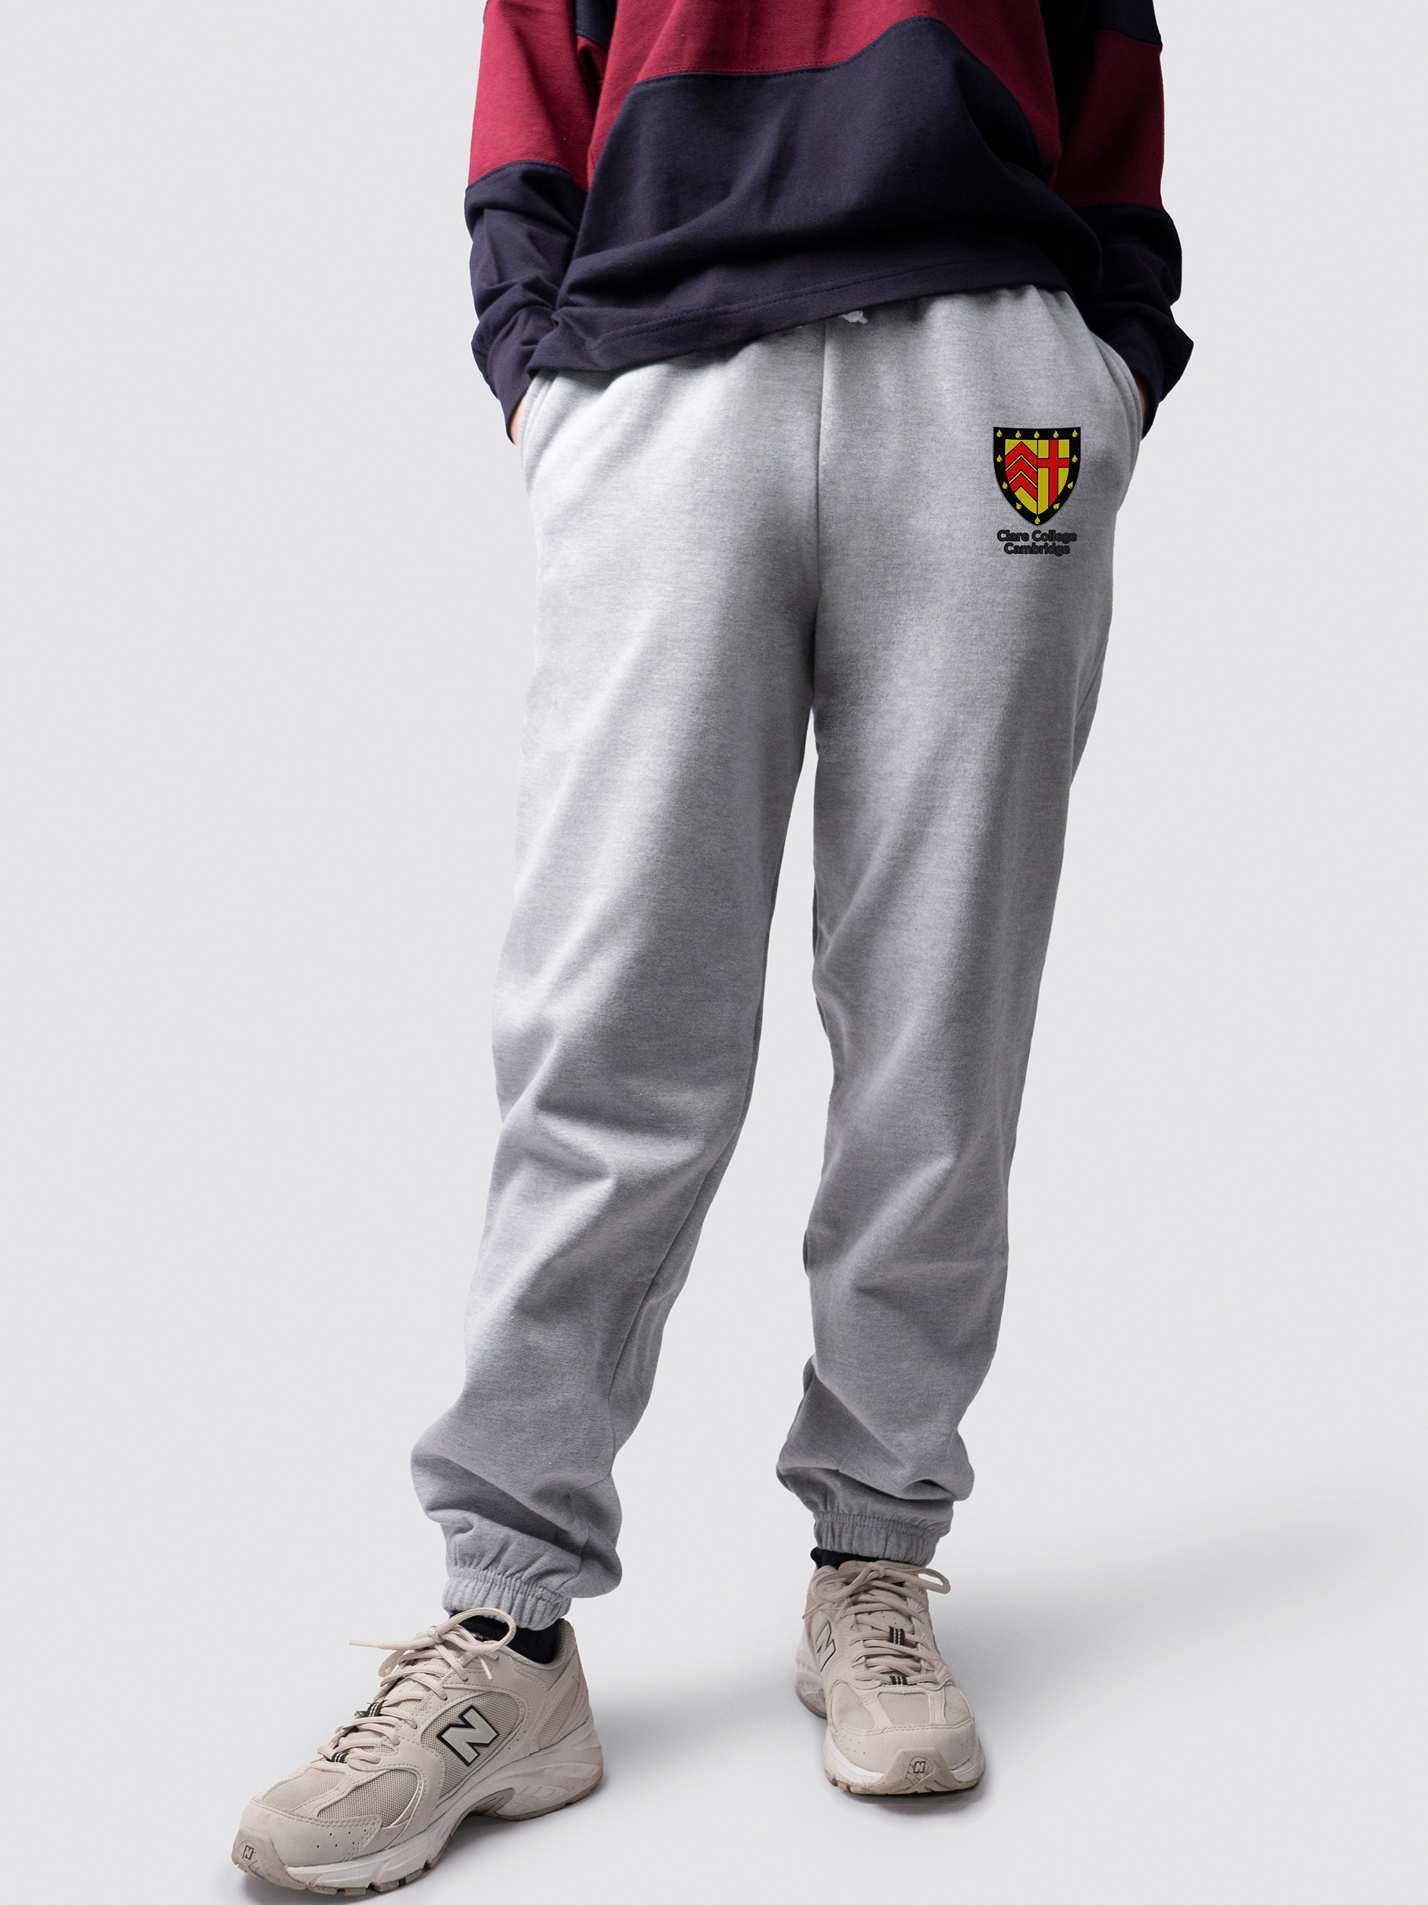 undergraduate cuffed sweatpants, made from soft cotton fabric, with Clare logo